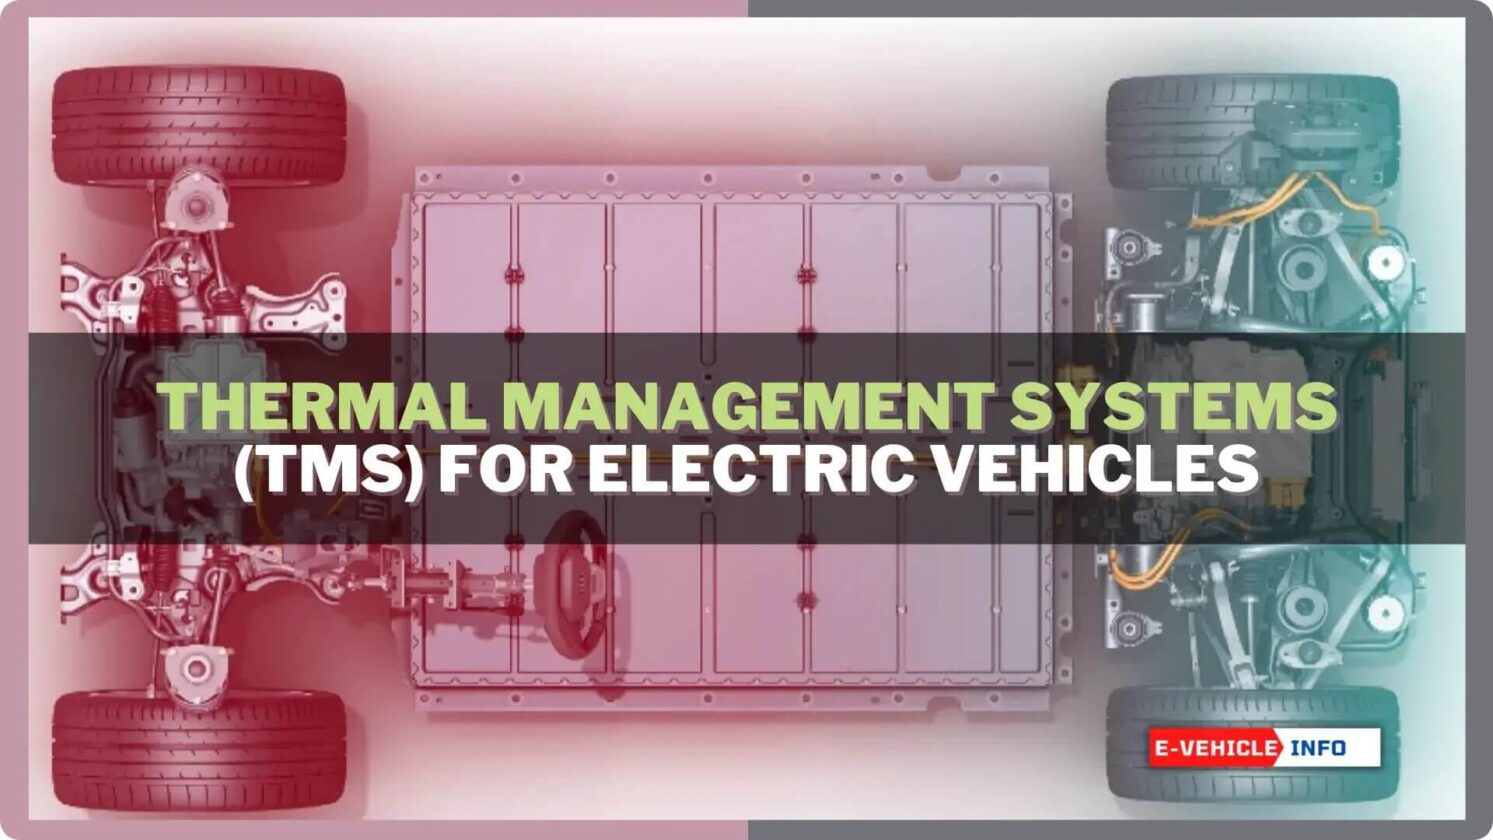 EV Thermal Management Systems Importance in Electric Vehicle E